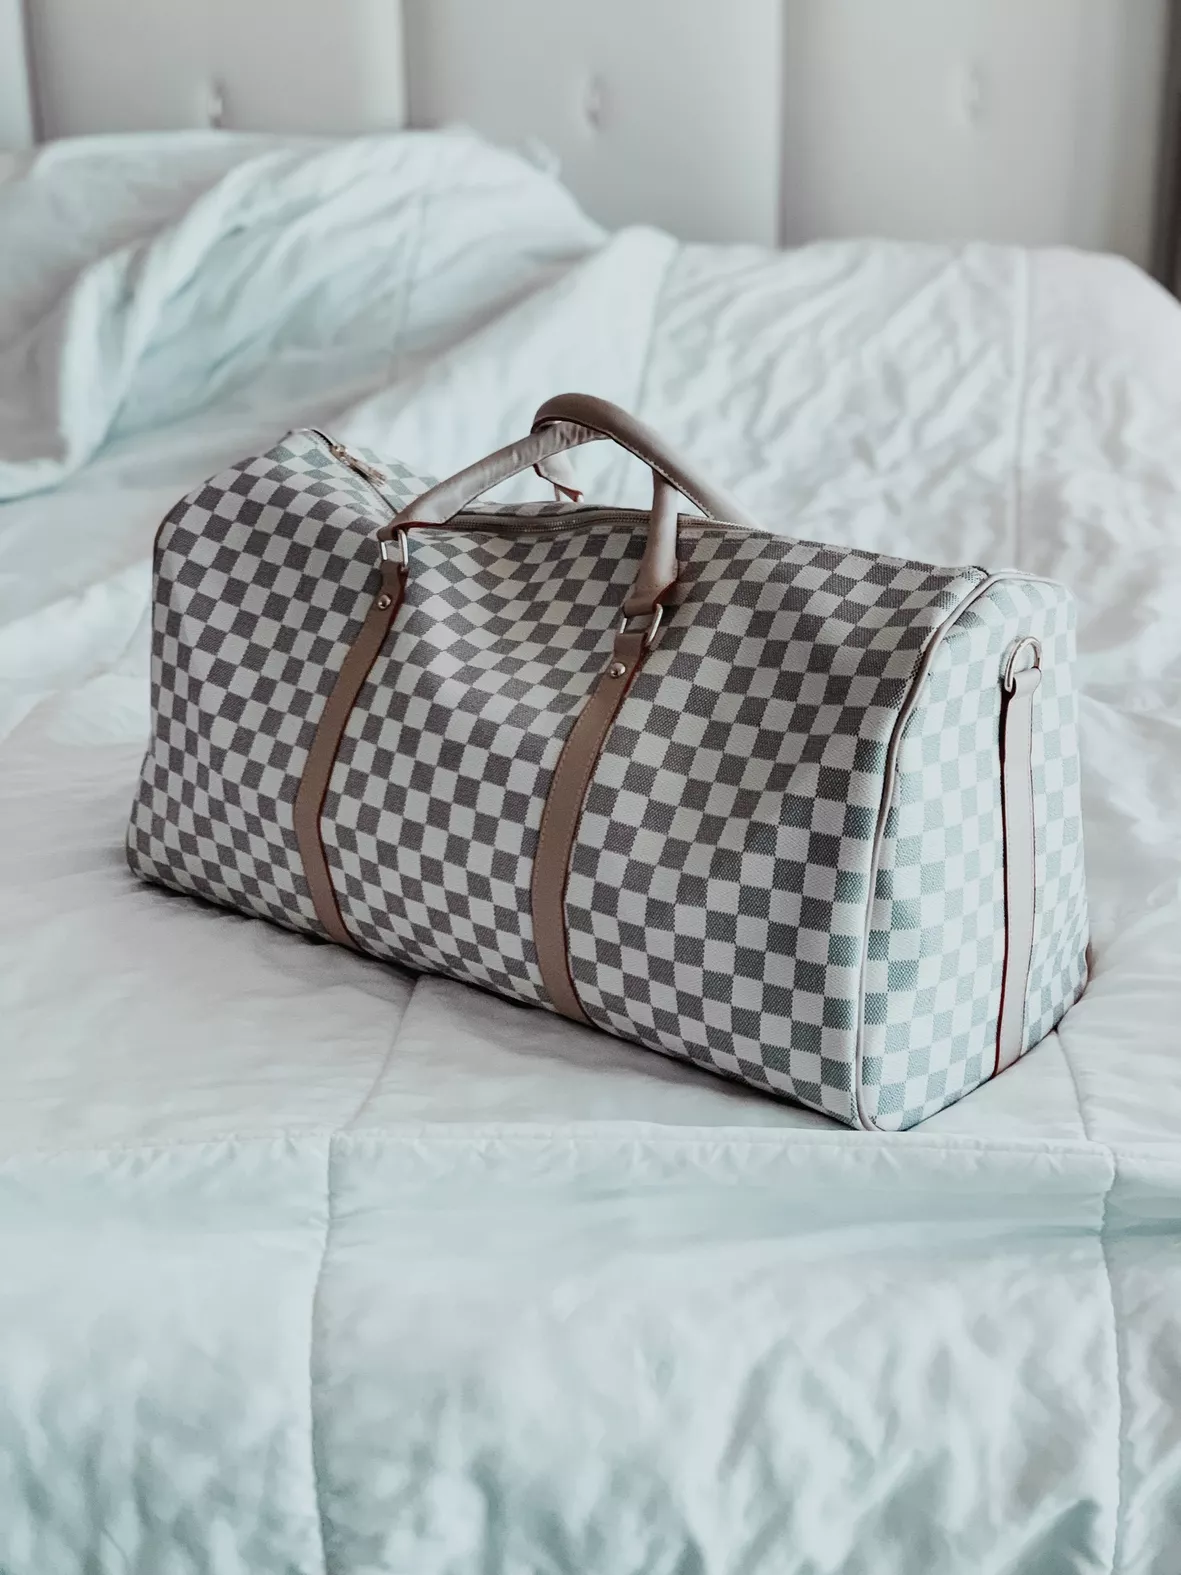 RICHPORTS Checkered Travel PU Leather Oversized Weekender Duffel Bag  Overnight Handbag Gym Bag for Large 